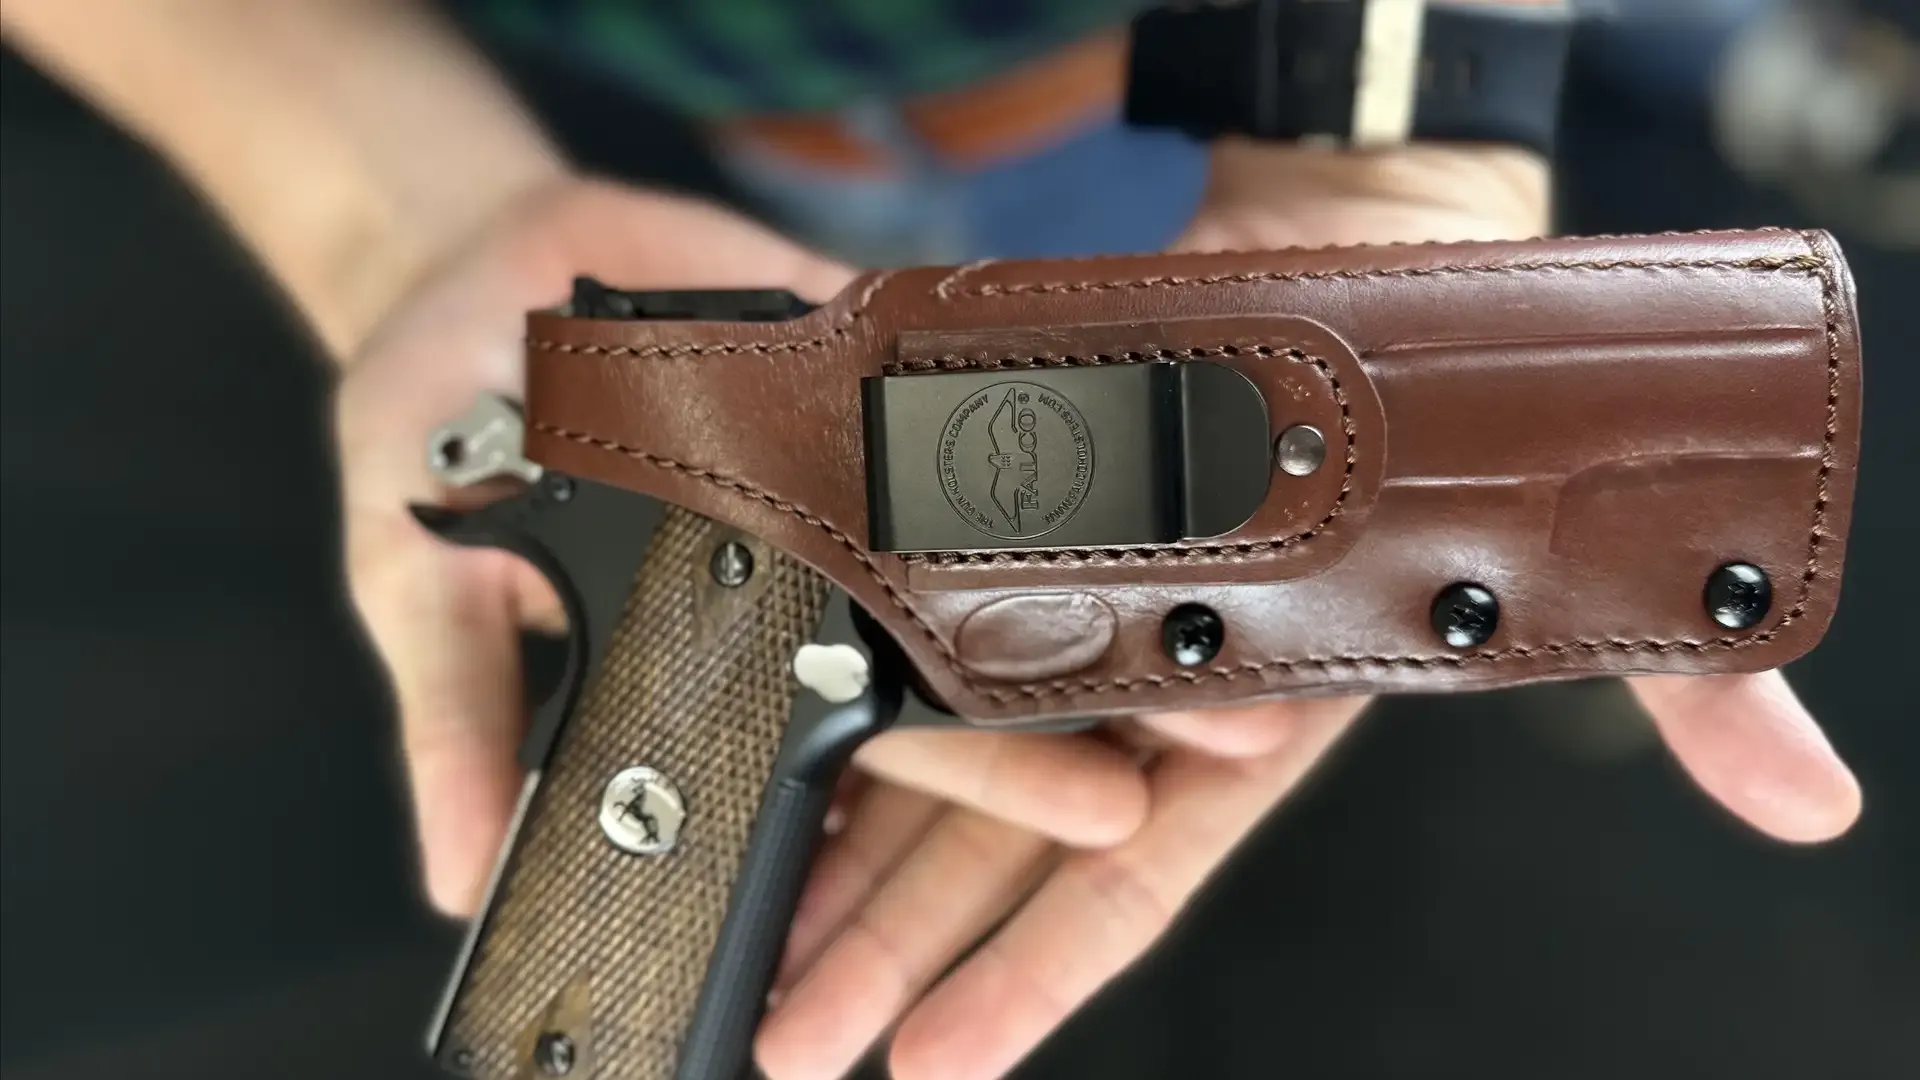 Level 1 concealed carry holster